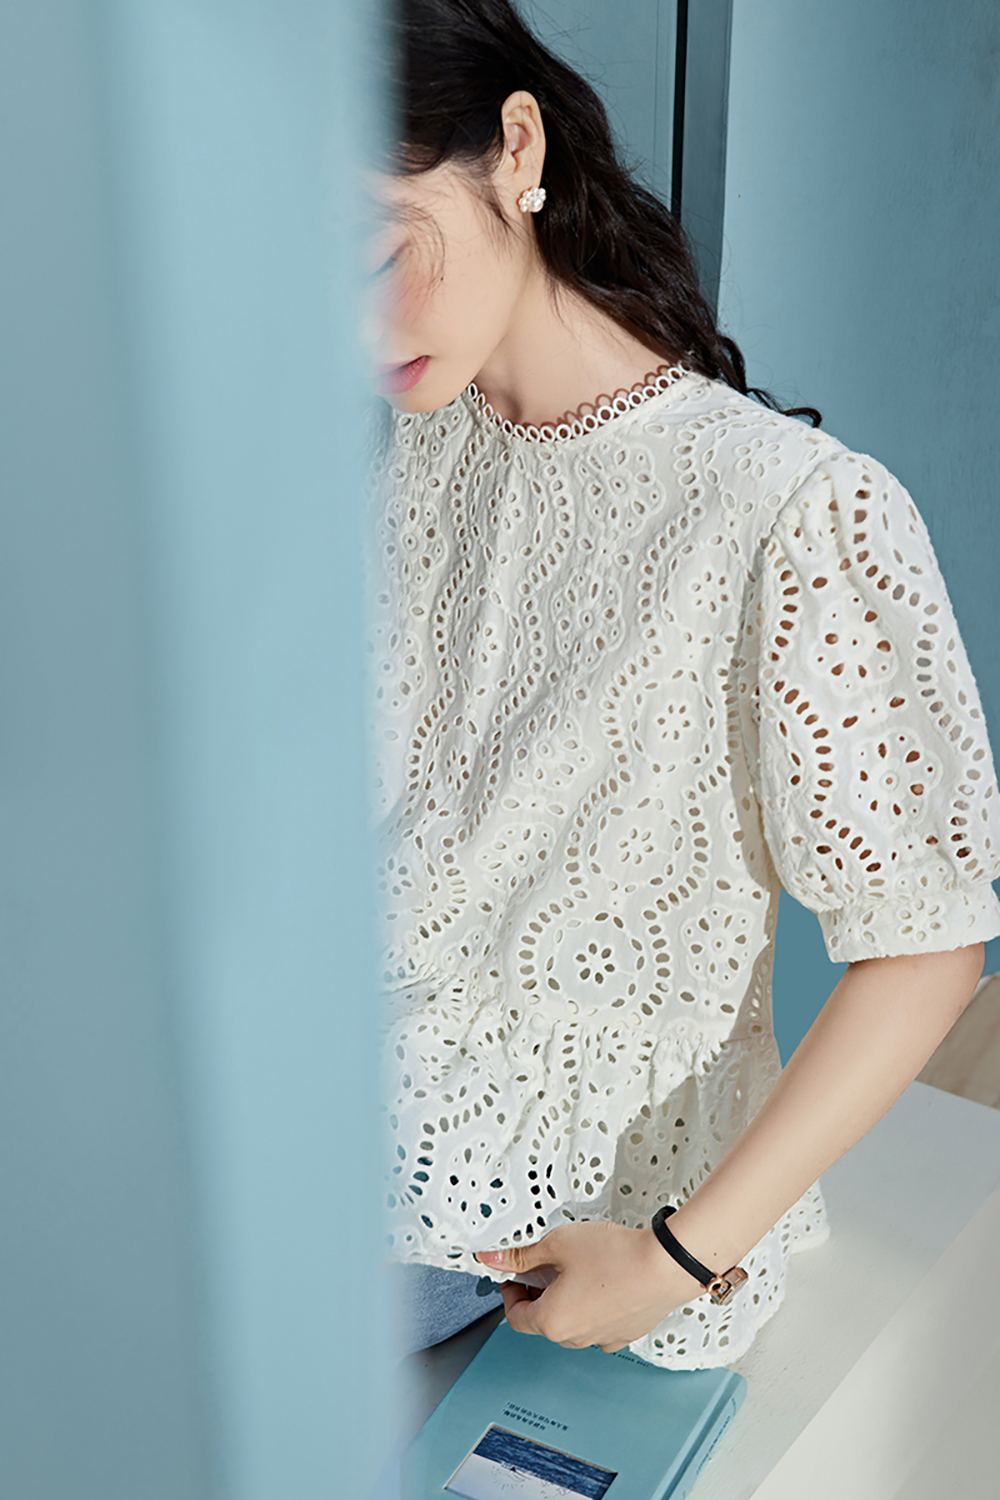 Ruffled laced blouse